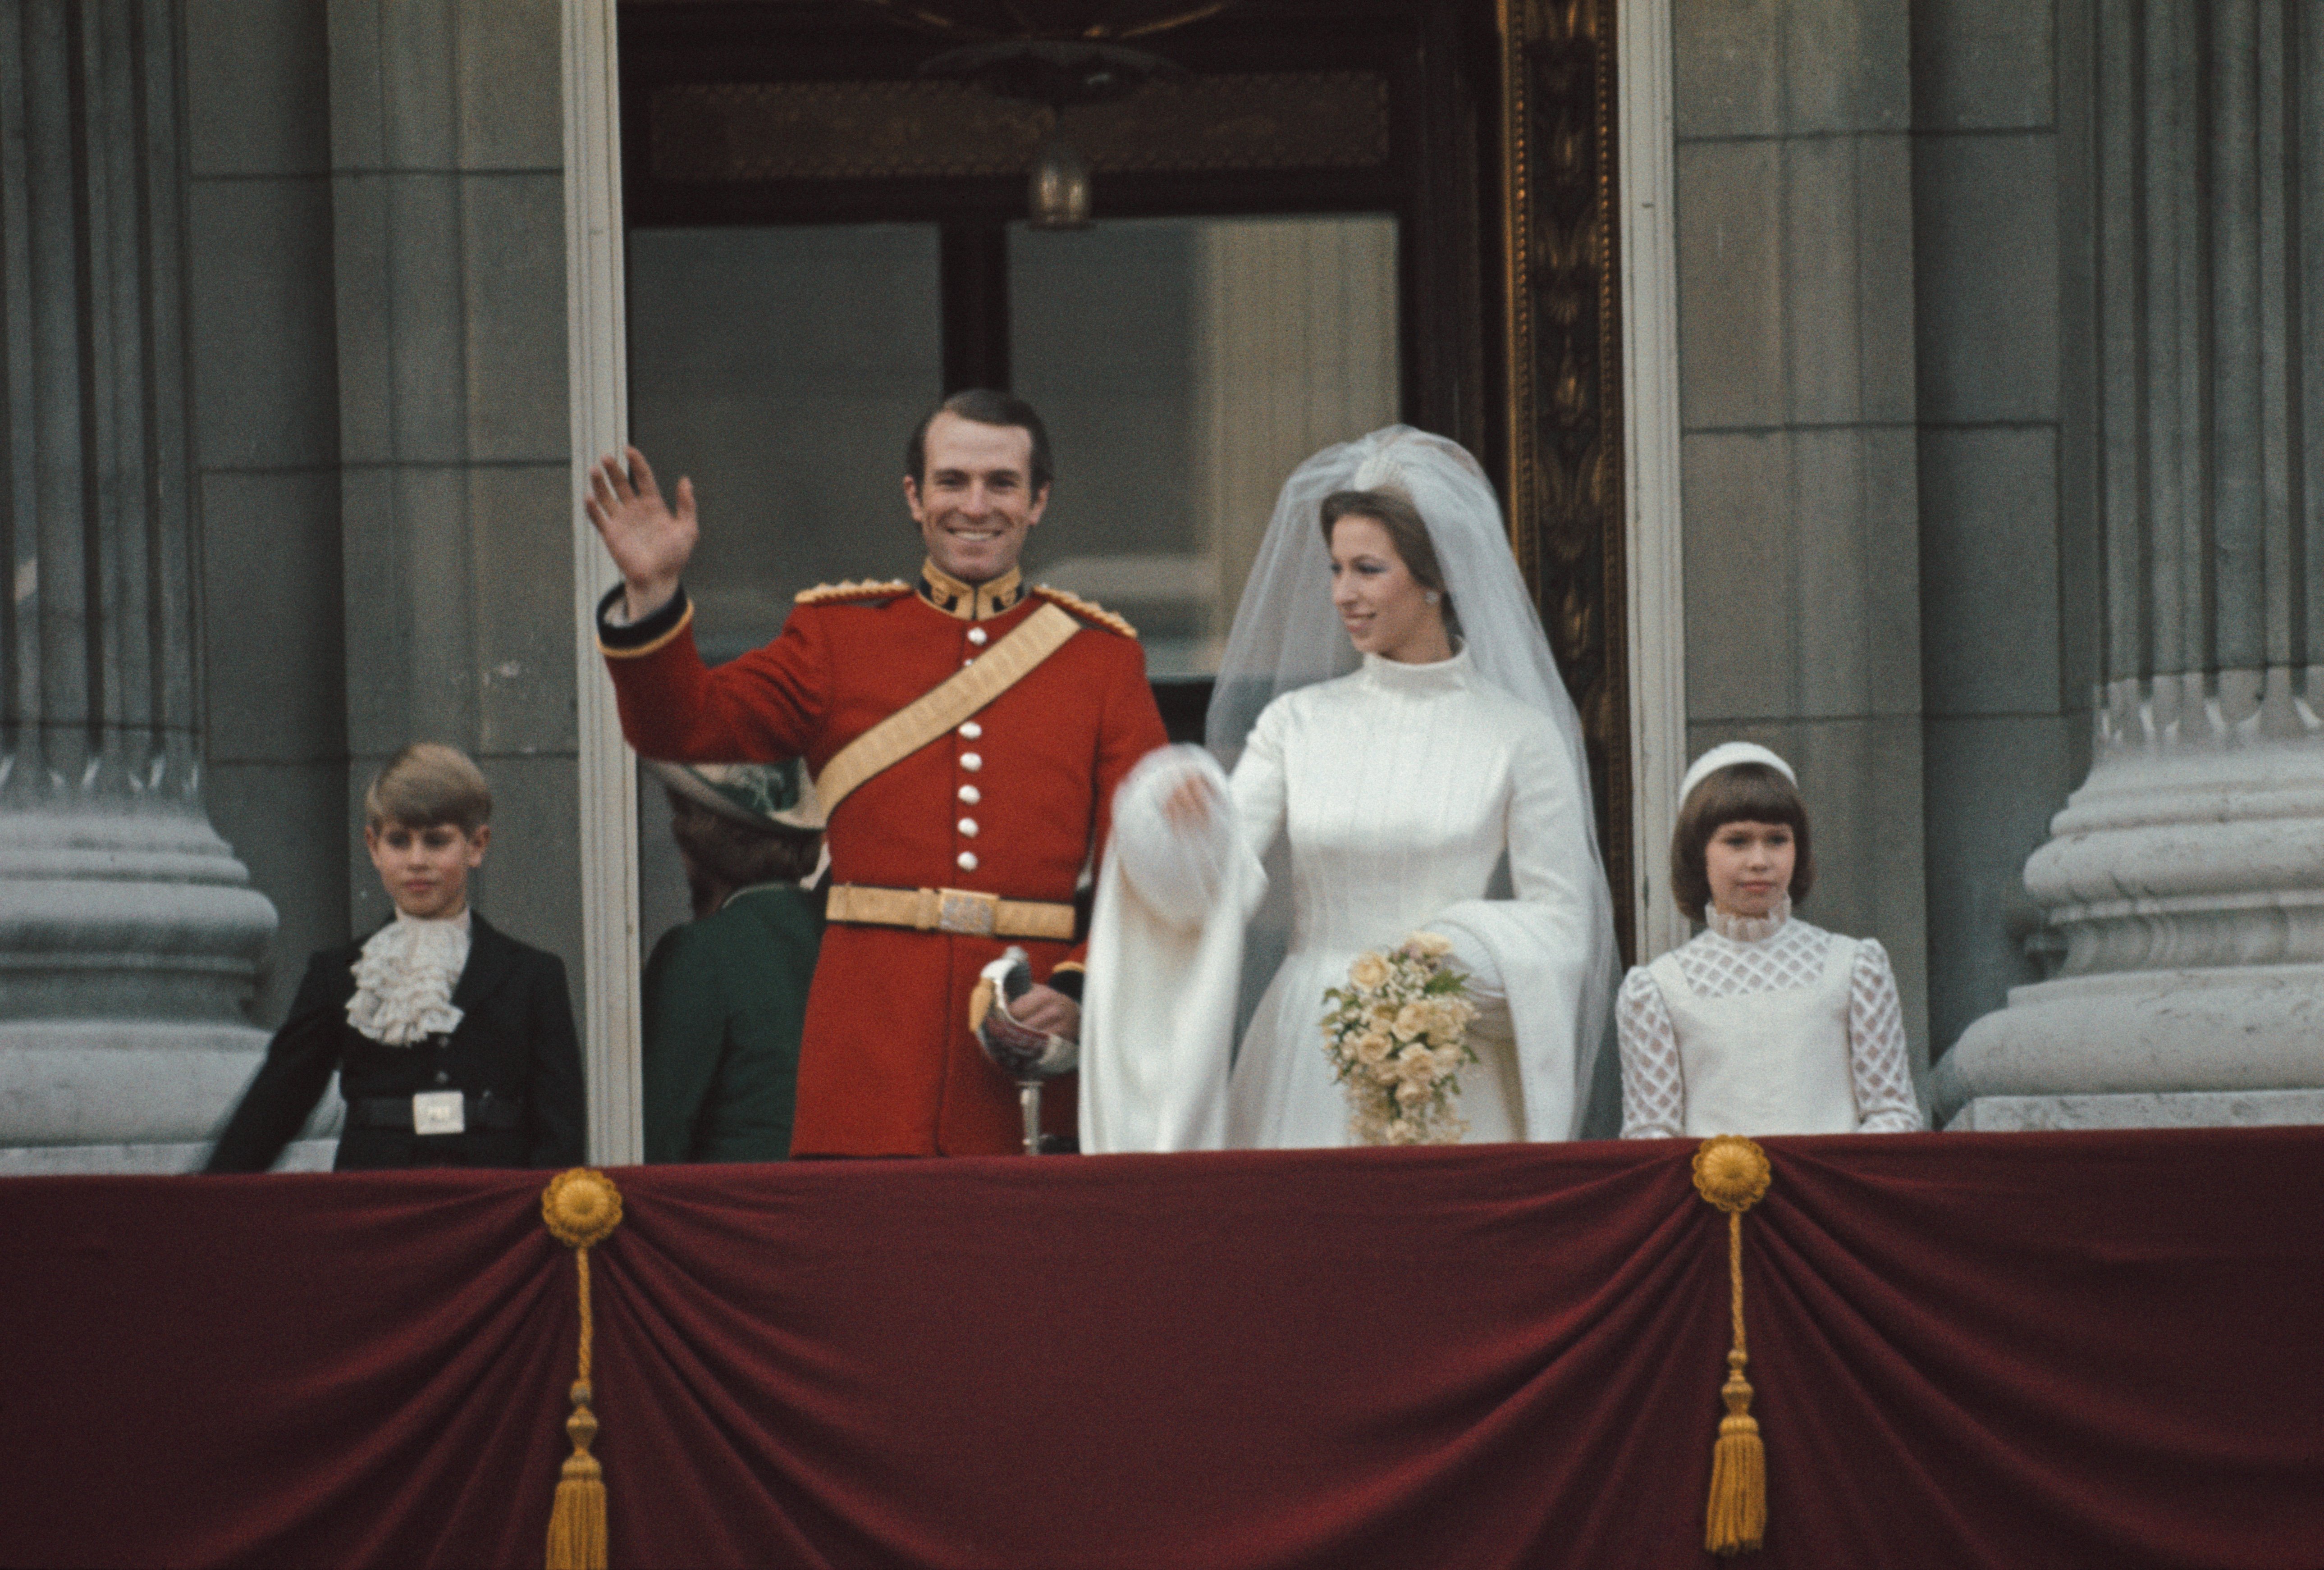 Princess Anne and Captain Mark Phillips wave from the balcony of Buckingham Palace following their wedding ceremony at Westminster Abbey on November 14, 1973 in London | Source: Getty Images